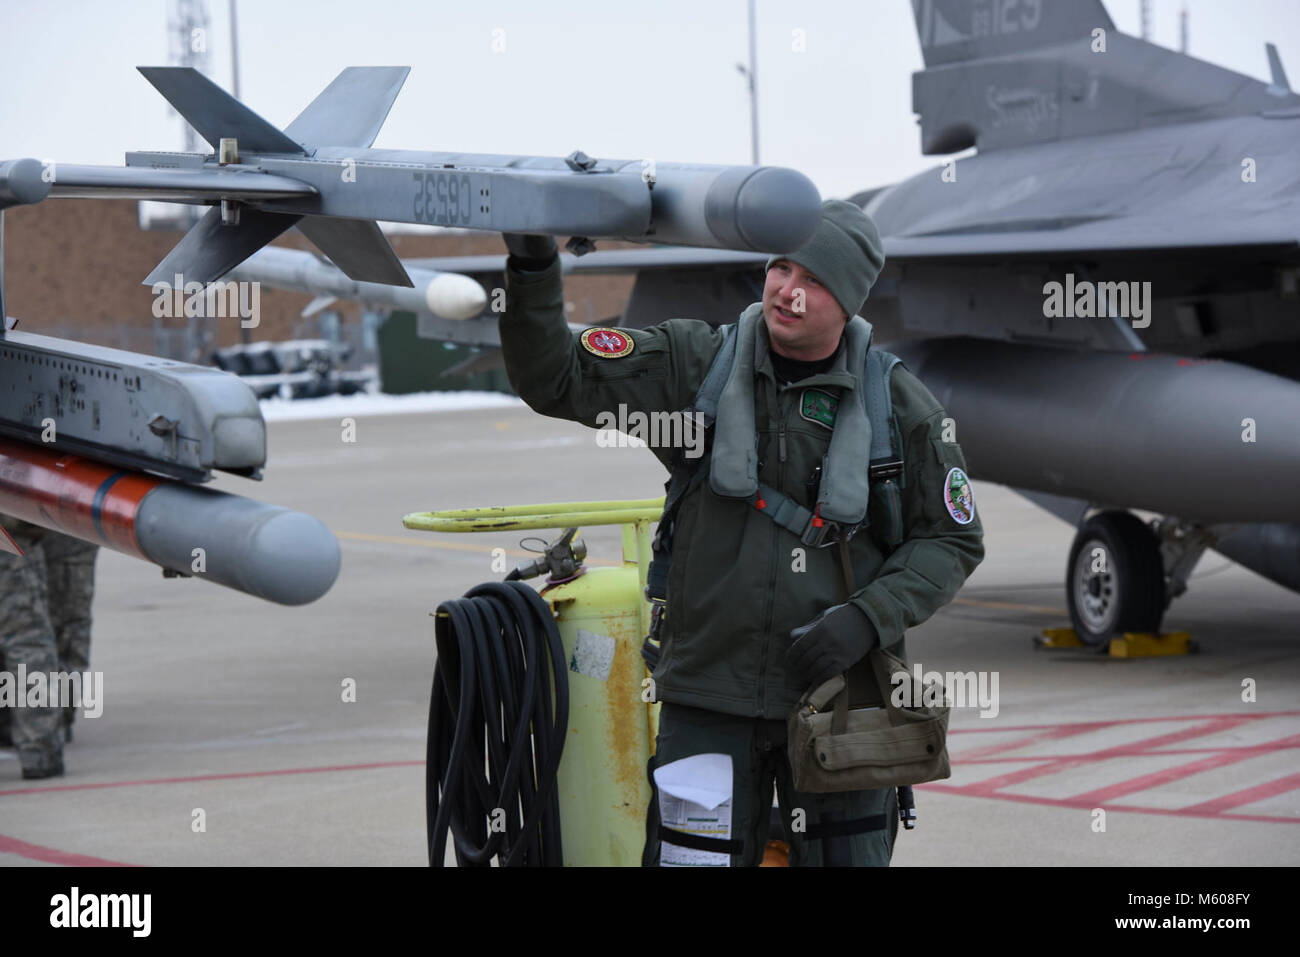 1st Lt. Travis Dancer, an F-16 Fighting Falcon pilot assigned to the 180th Fighter Wing in Swanton, Ohio, inspects his aircraft before takeoff on Jan. 7, 2018. Temperatures throughout January have reached record lows across the country. In Northwest Ohio, the wind chill has consistently been in the -10 to -20 range, even dipping close to -30 at times. Extreme weather situation such as this help prepare Airmen at the 180FW to operate in austere environments. Stock Photo